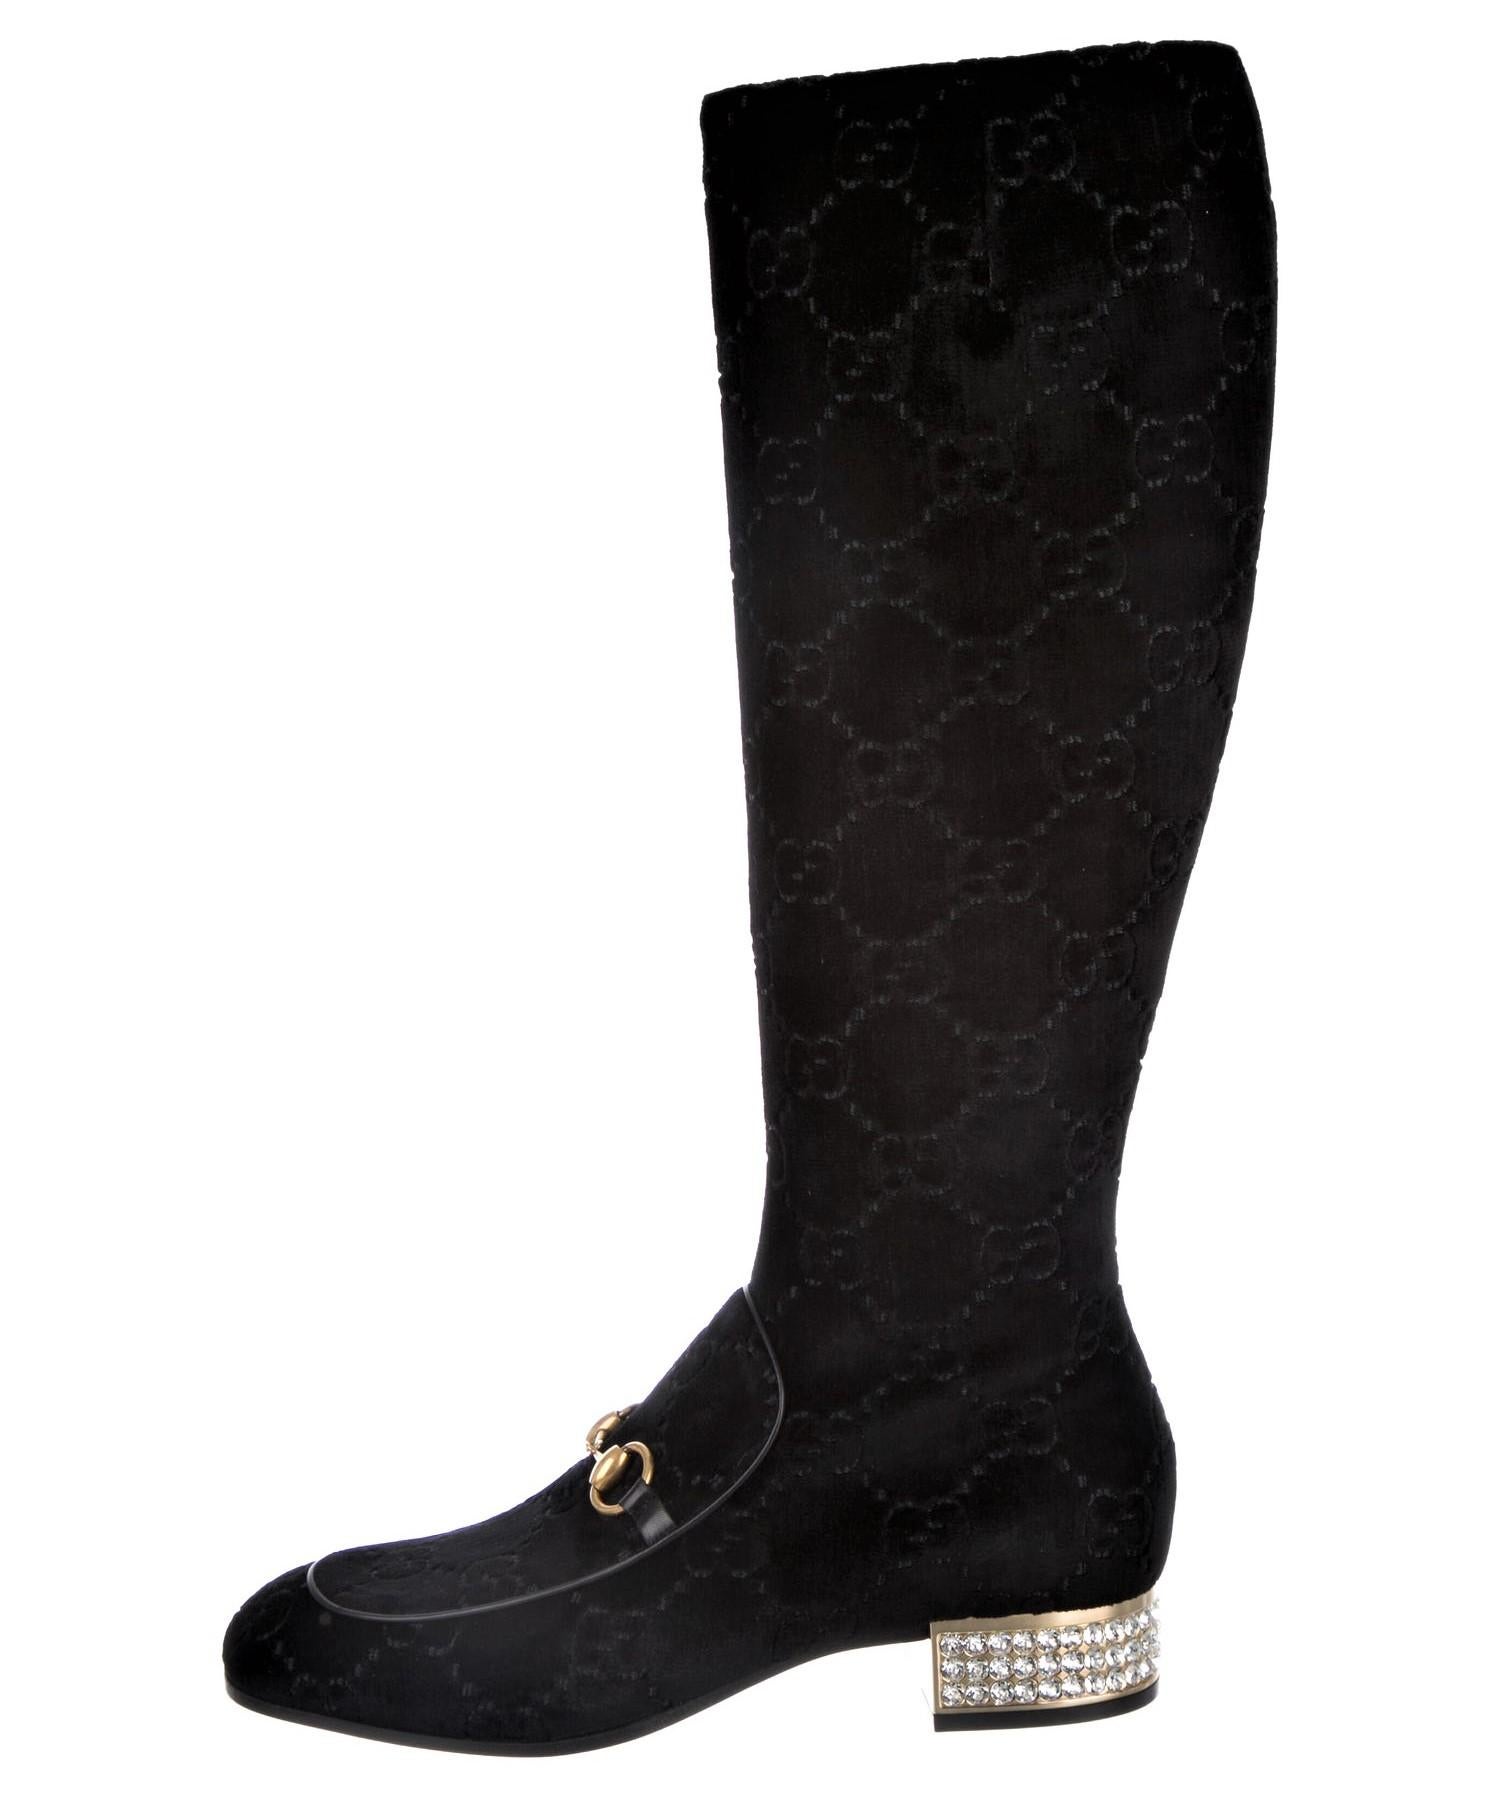 Gucci
Brand New with Box
* Black GG Velvet Boots
* Gold Horsebit Accent
* Crystal Heels
* Size: 38